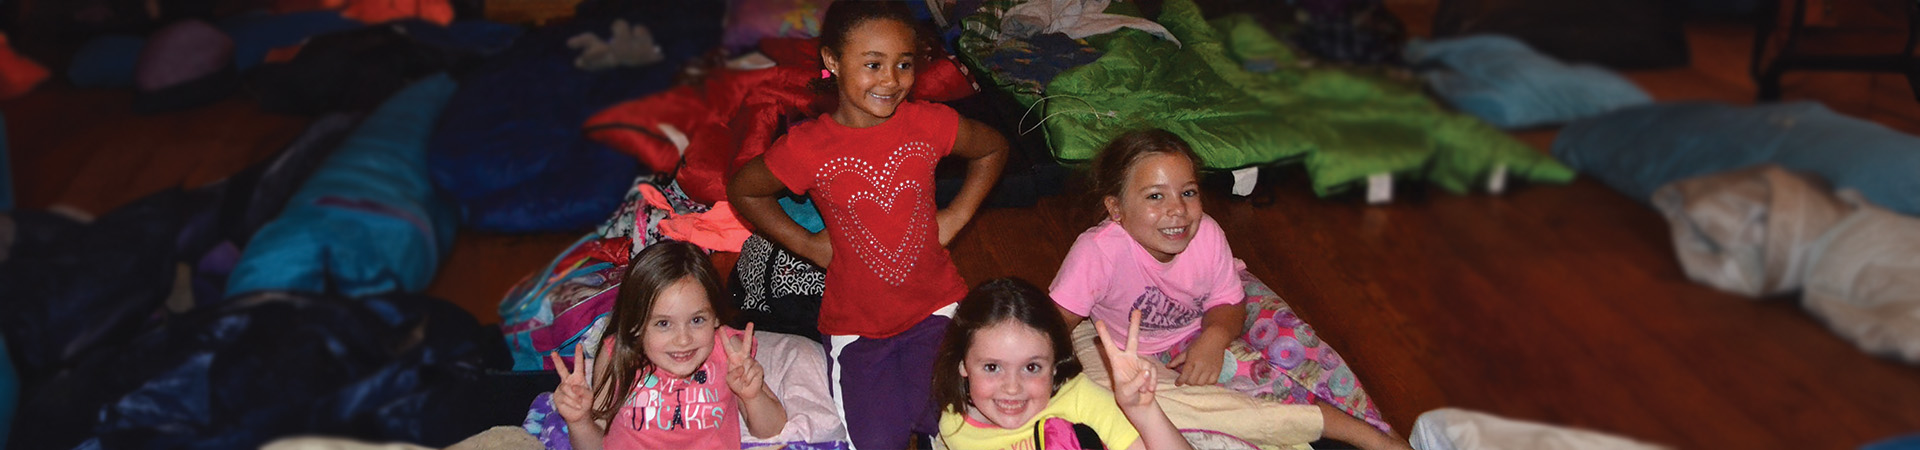  Troop #4890 having fun with camping and sleepovers! 